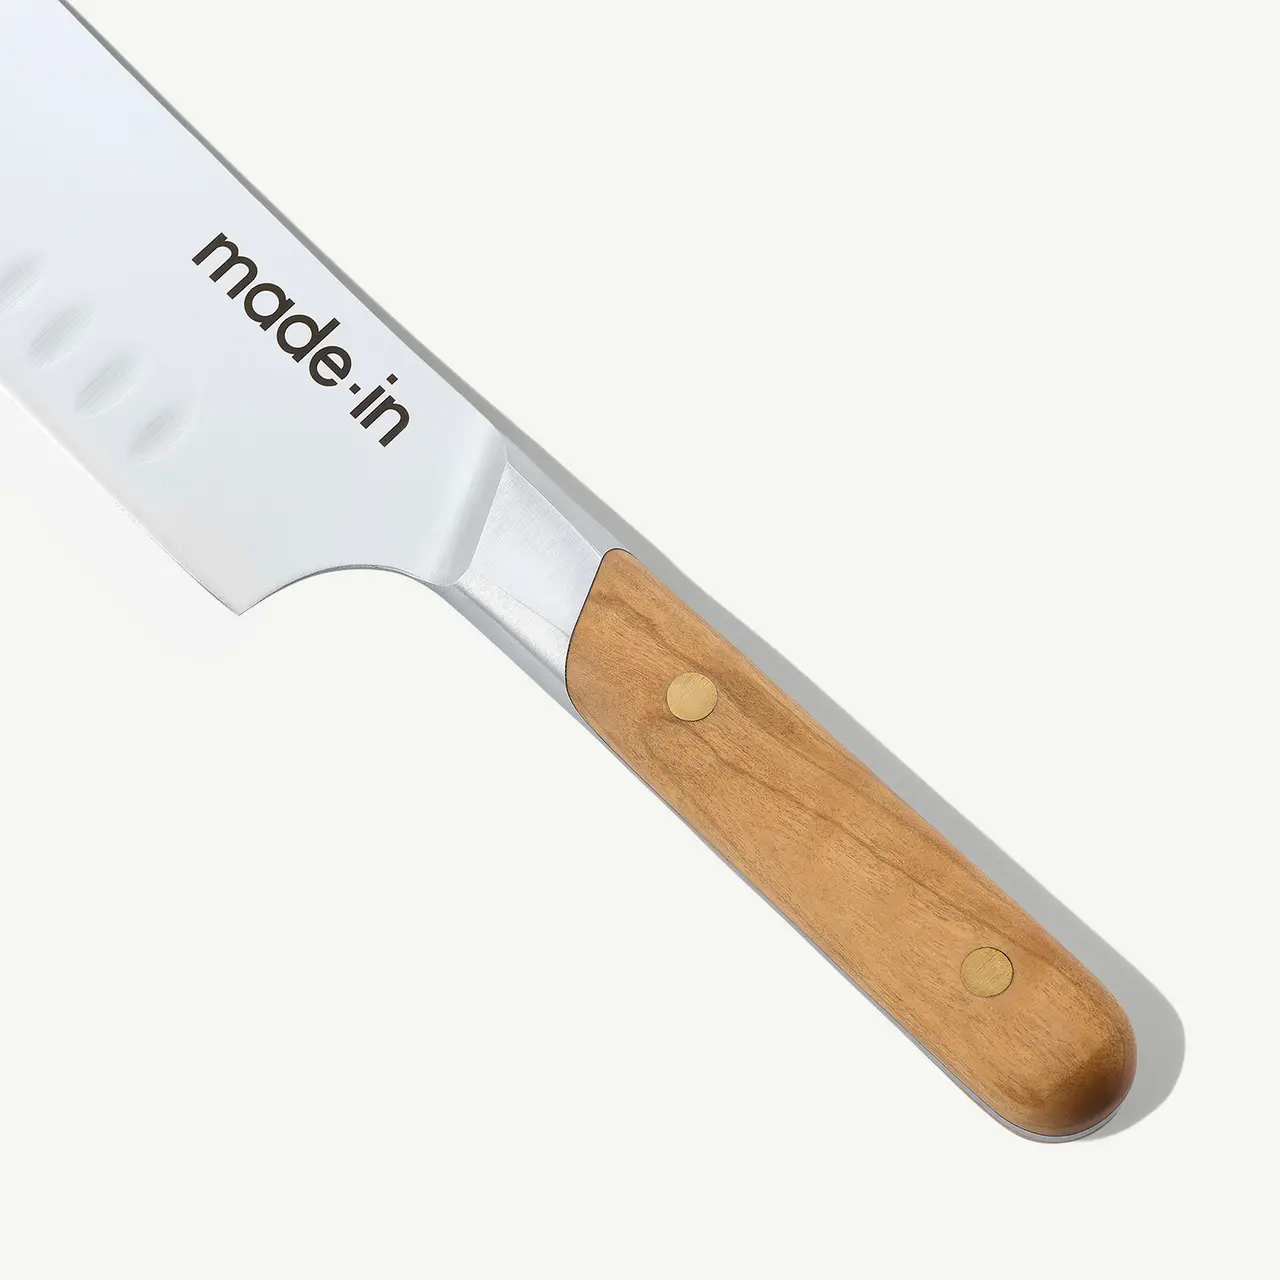 A close-up of a kitchen knife with a wooden handle and the text "made.in" imprinted on its blade.